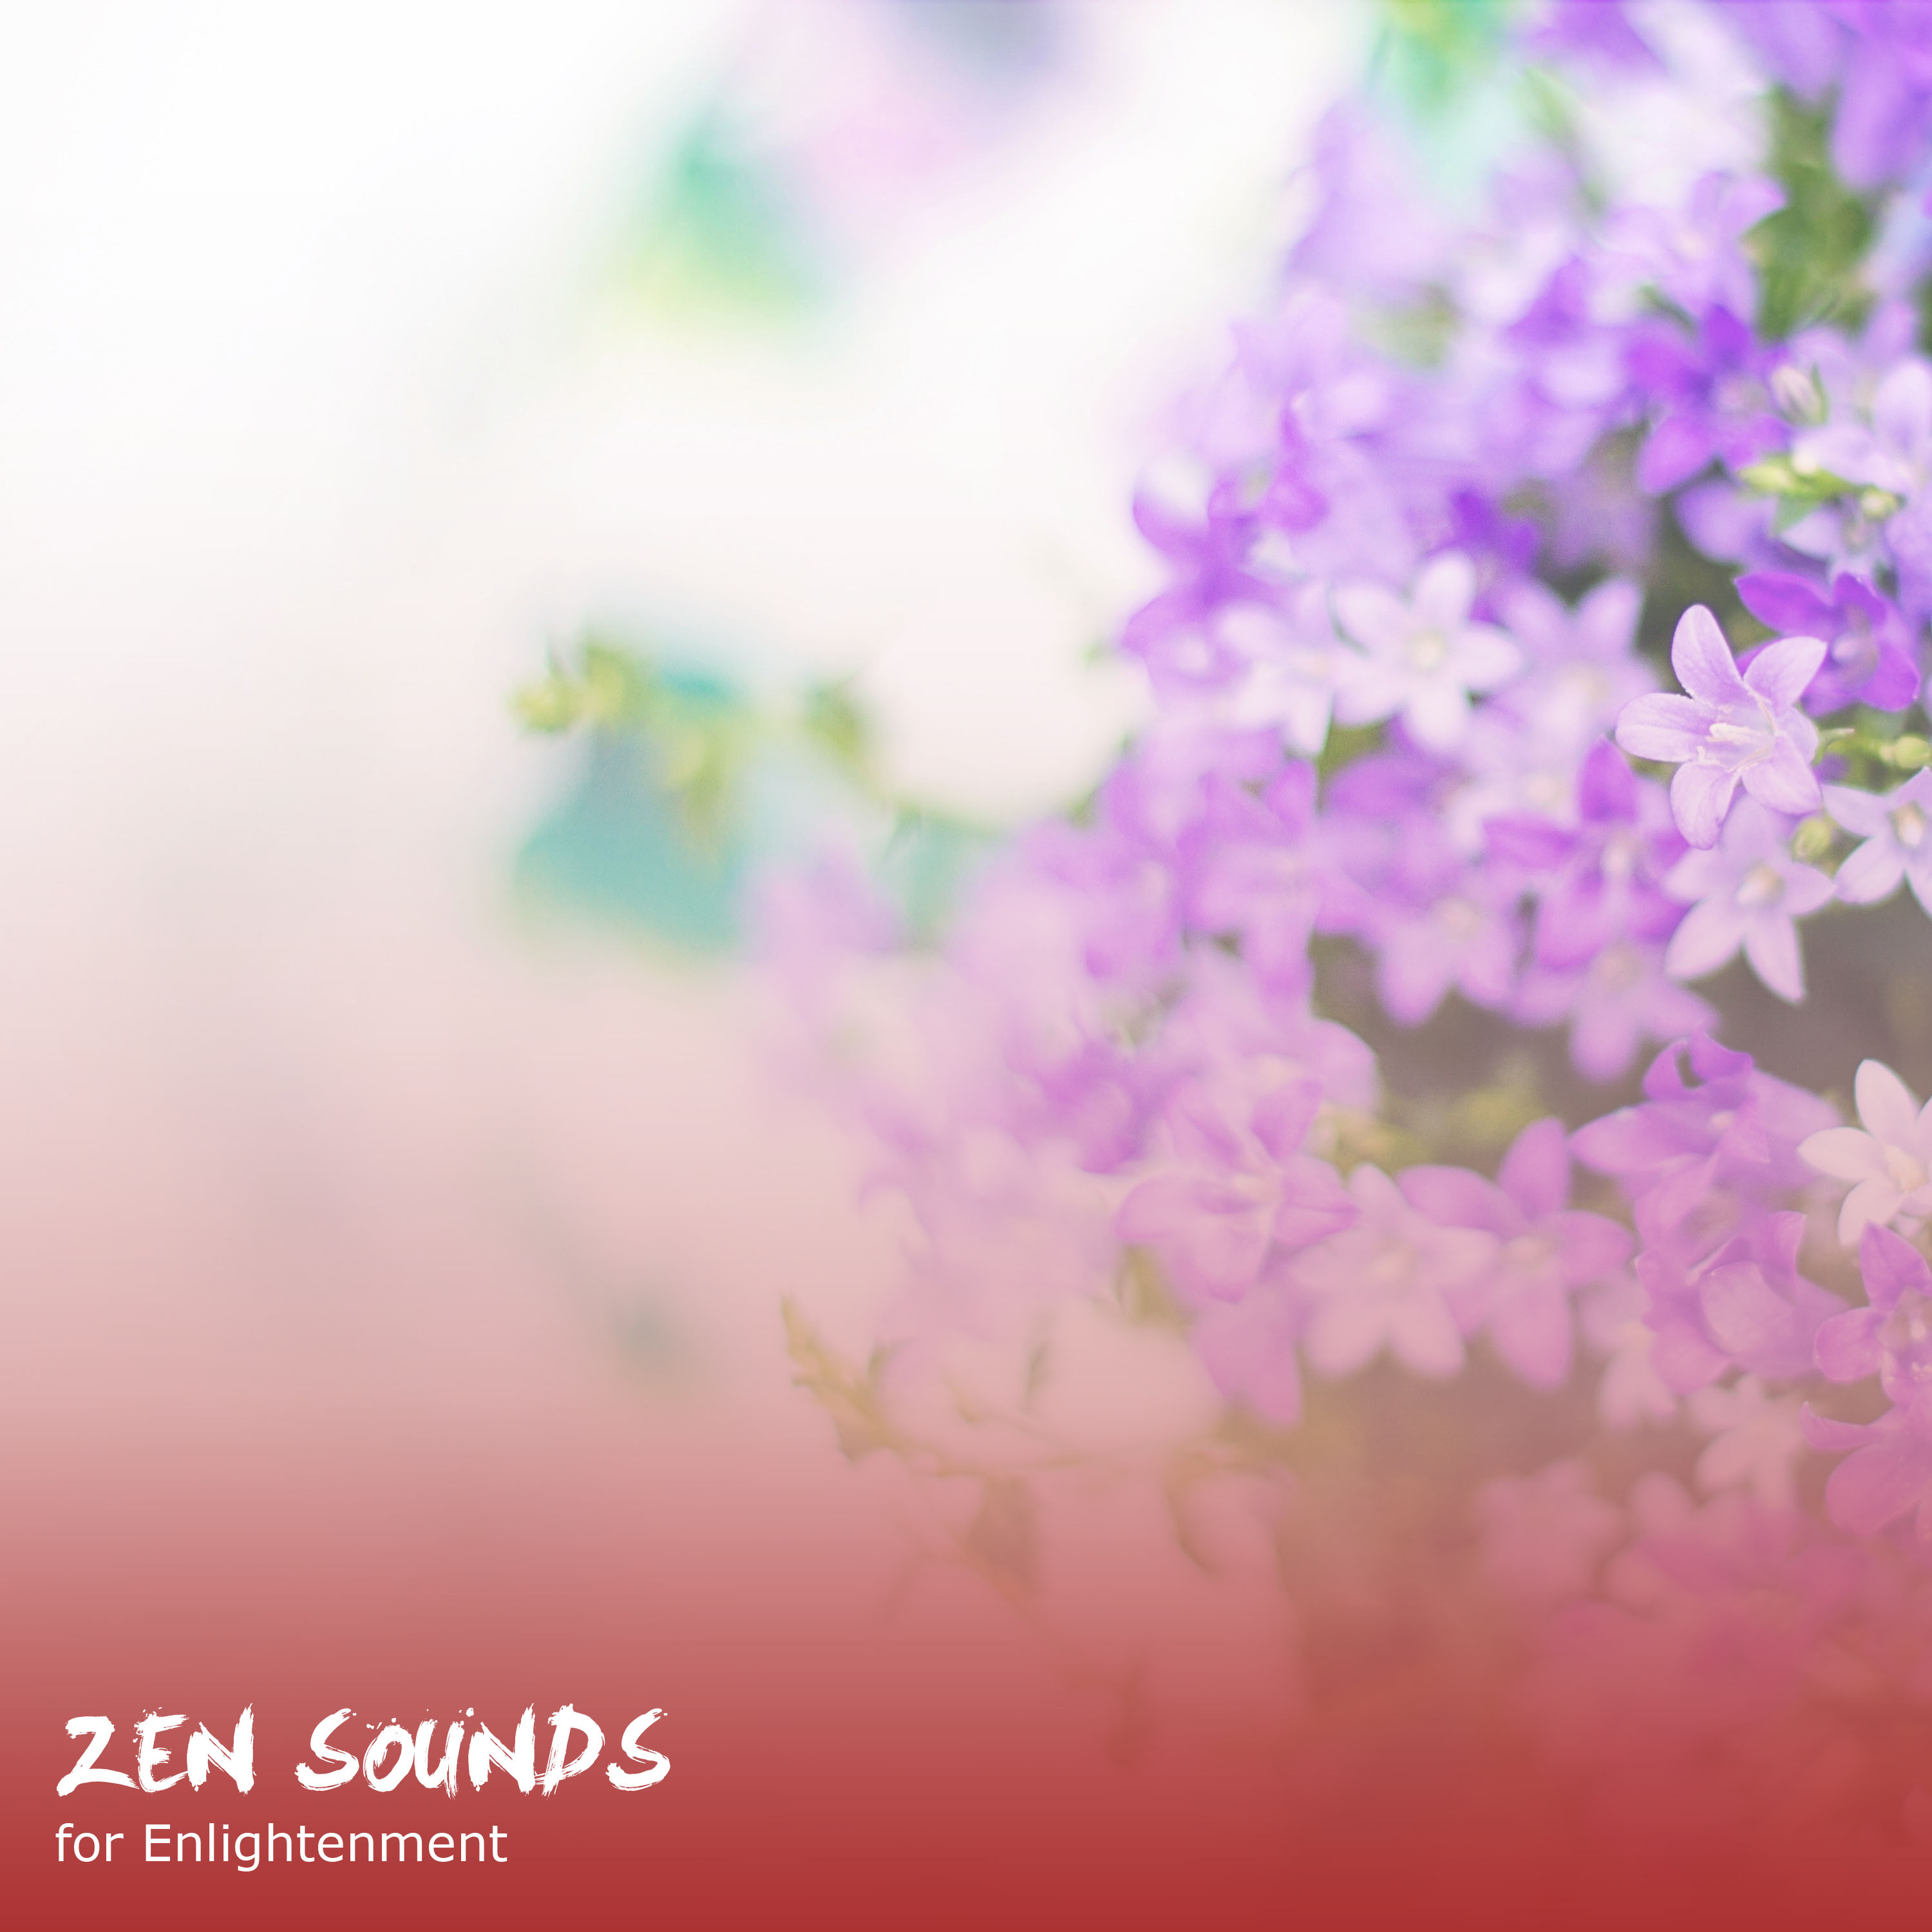 15 Relaxing, Ambient Sounds for Meditation, Yoga & Spa